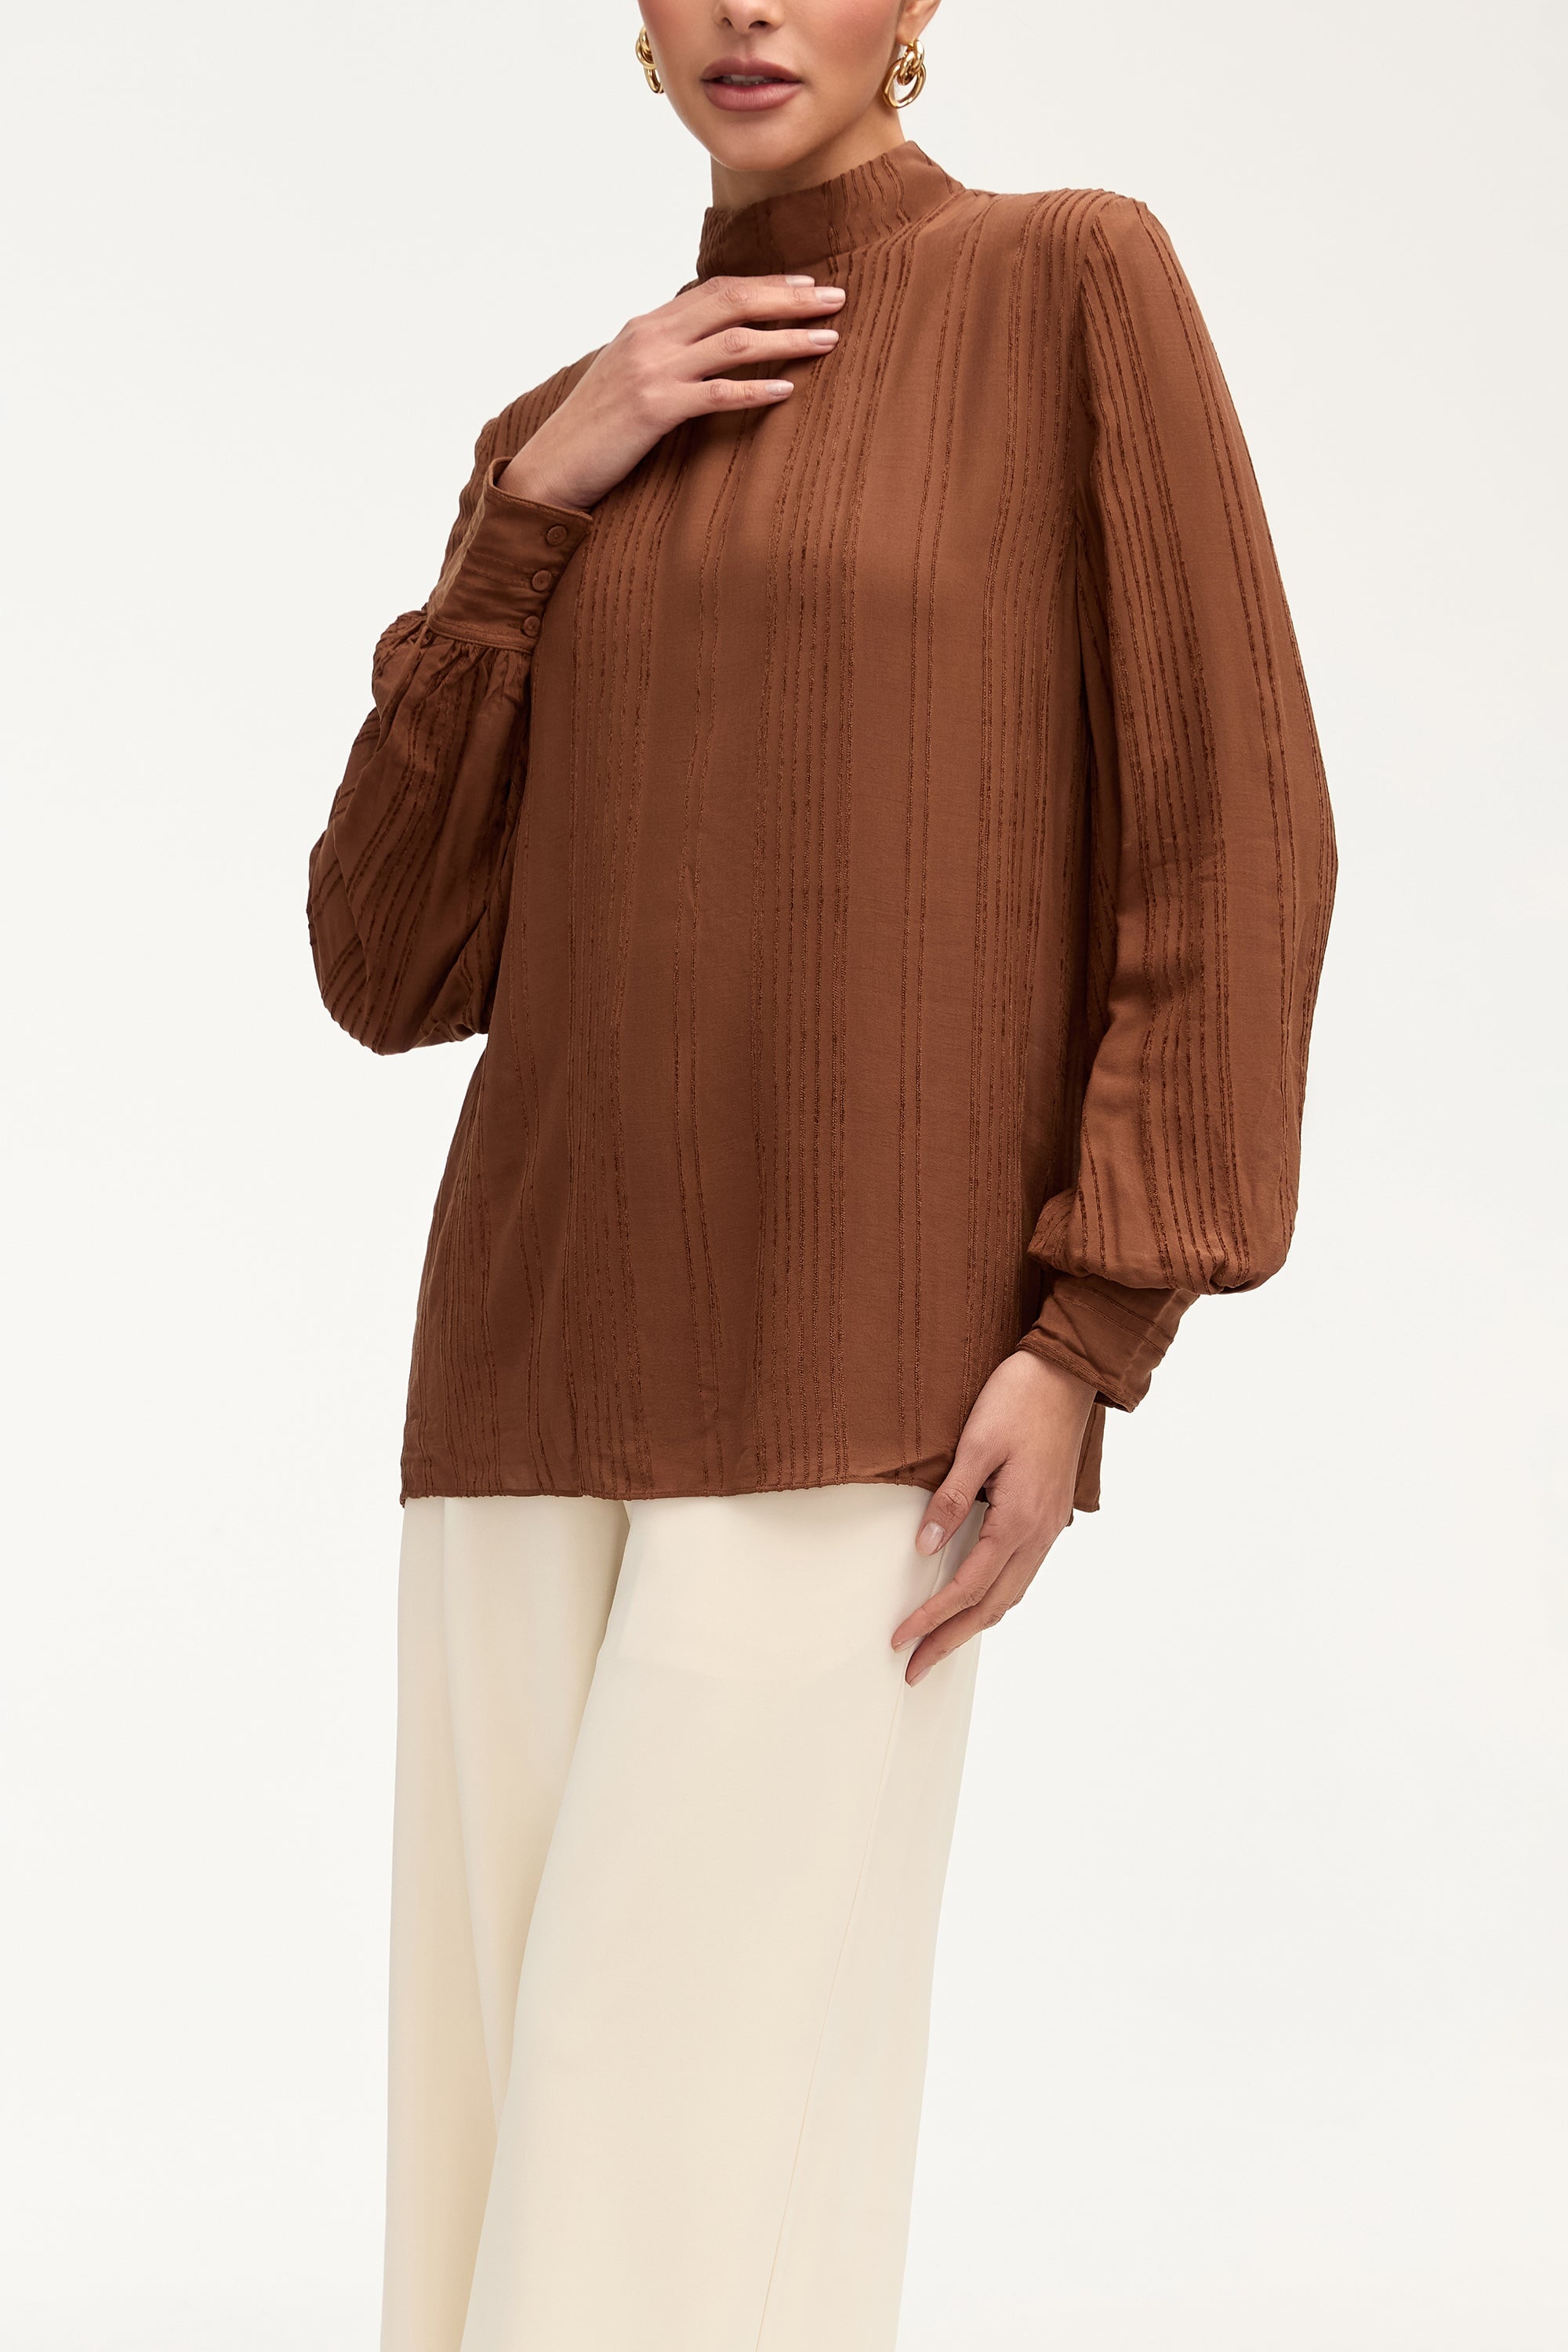 Textured Rayon Balloon Sleeve Blouse - Brown Cocoa Tops Veiled Collection 